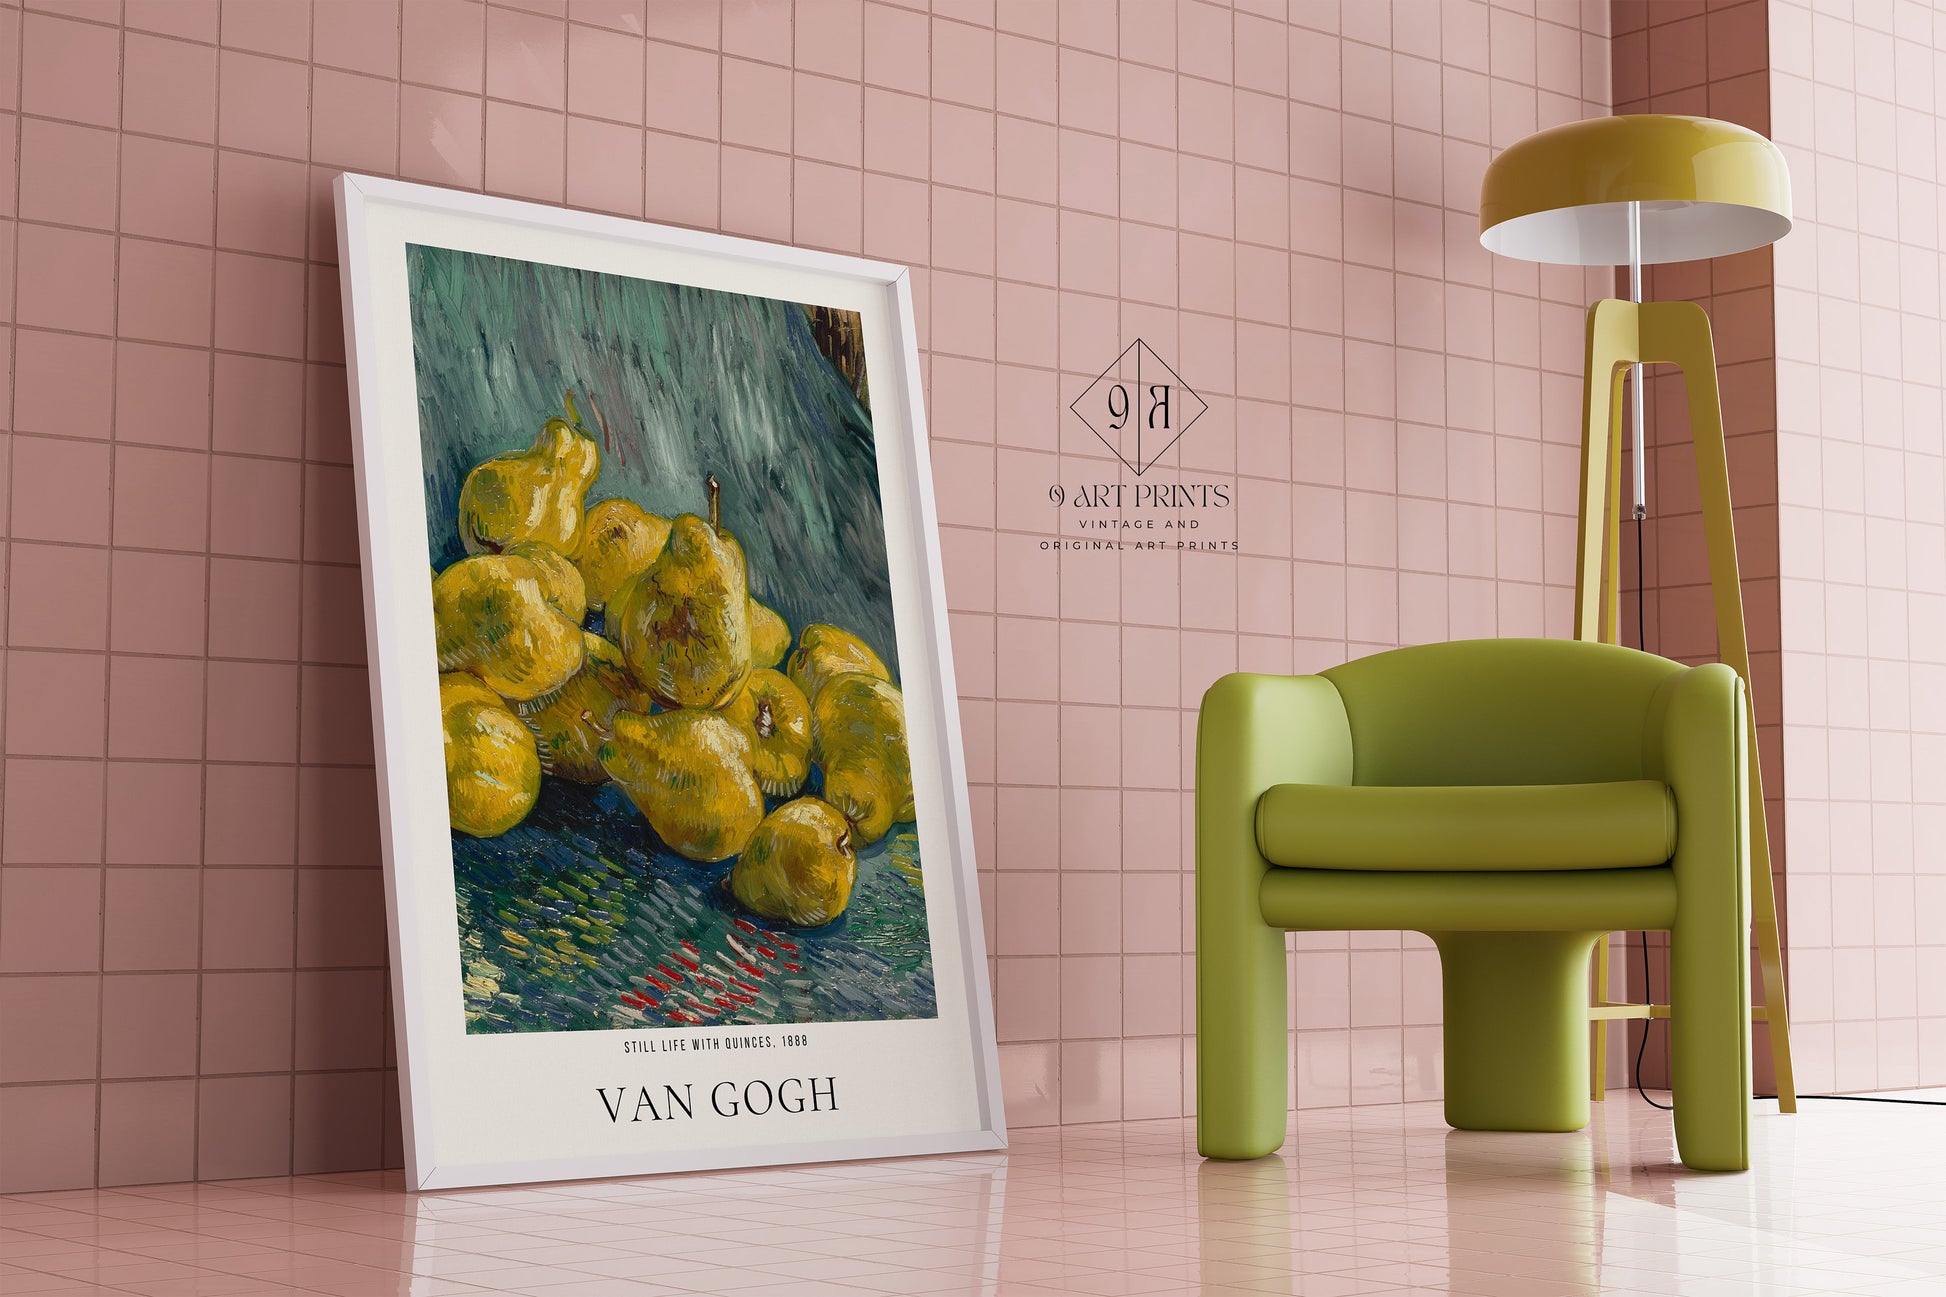 Van Gogh Still Life with Quinces Exhibition Museum Poster Fine Art Painting Vintage Famous Ready to hang Framed Home Office Decor Gift Idea